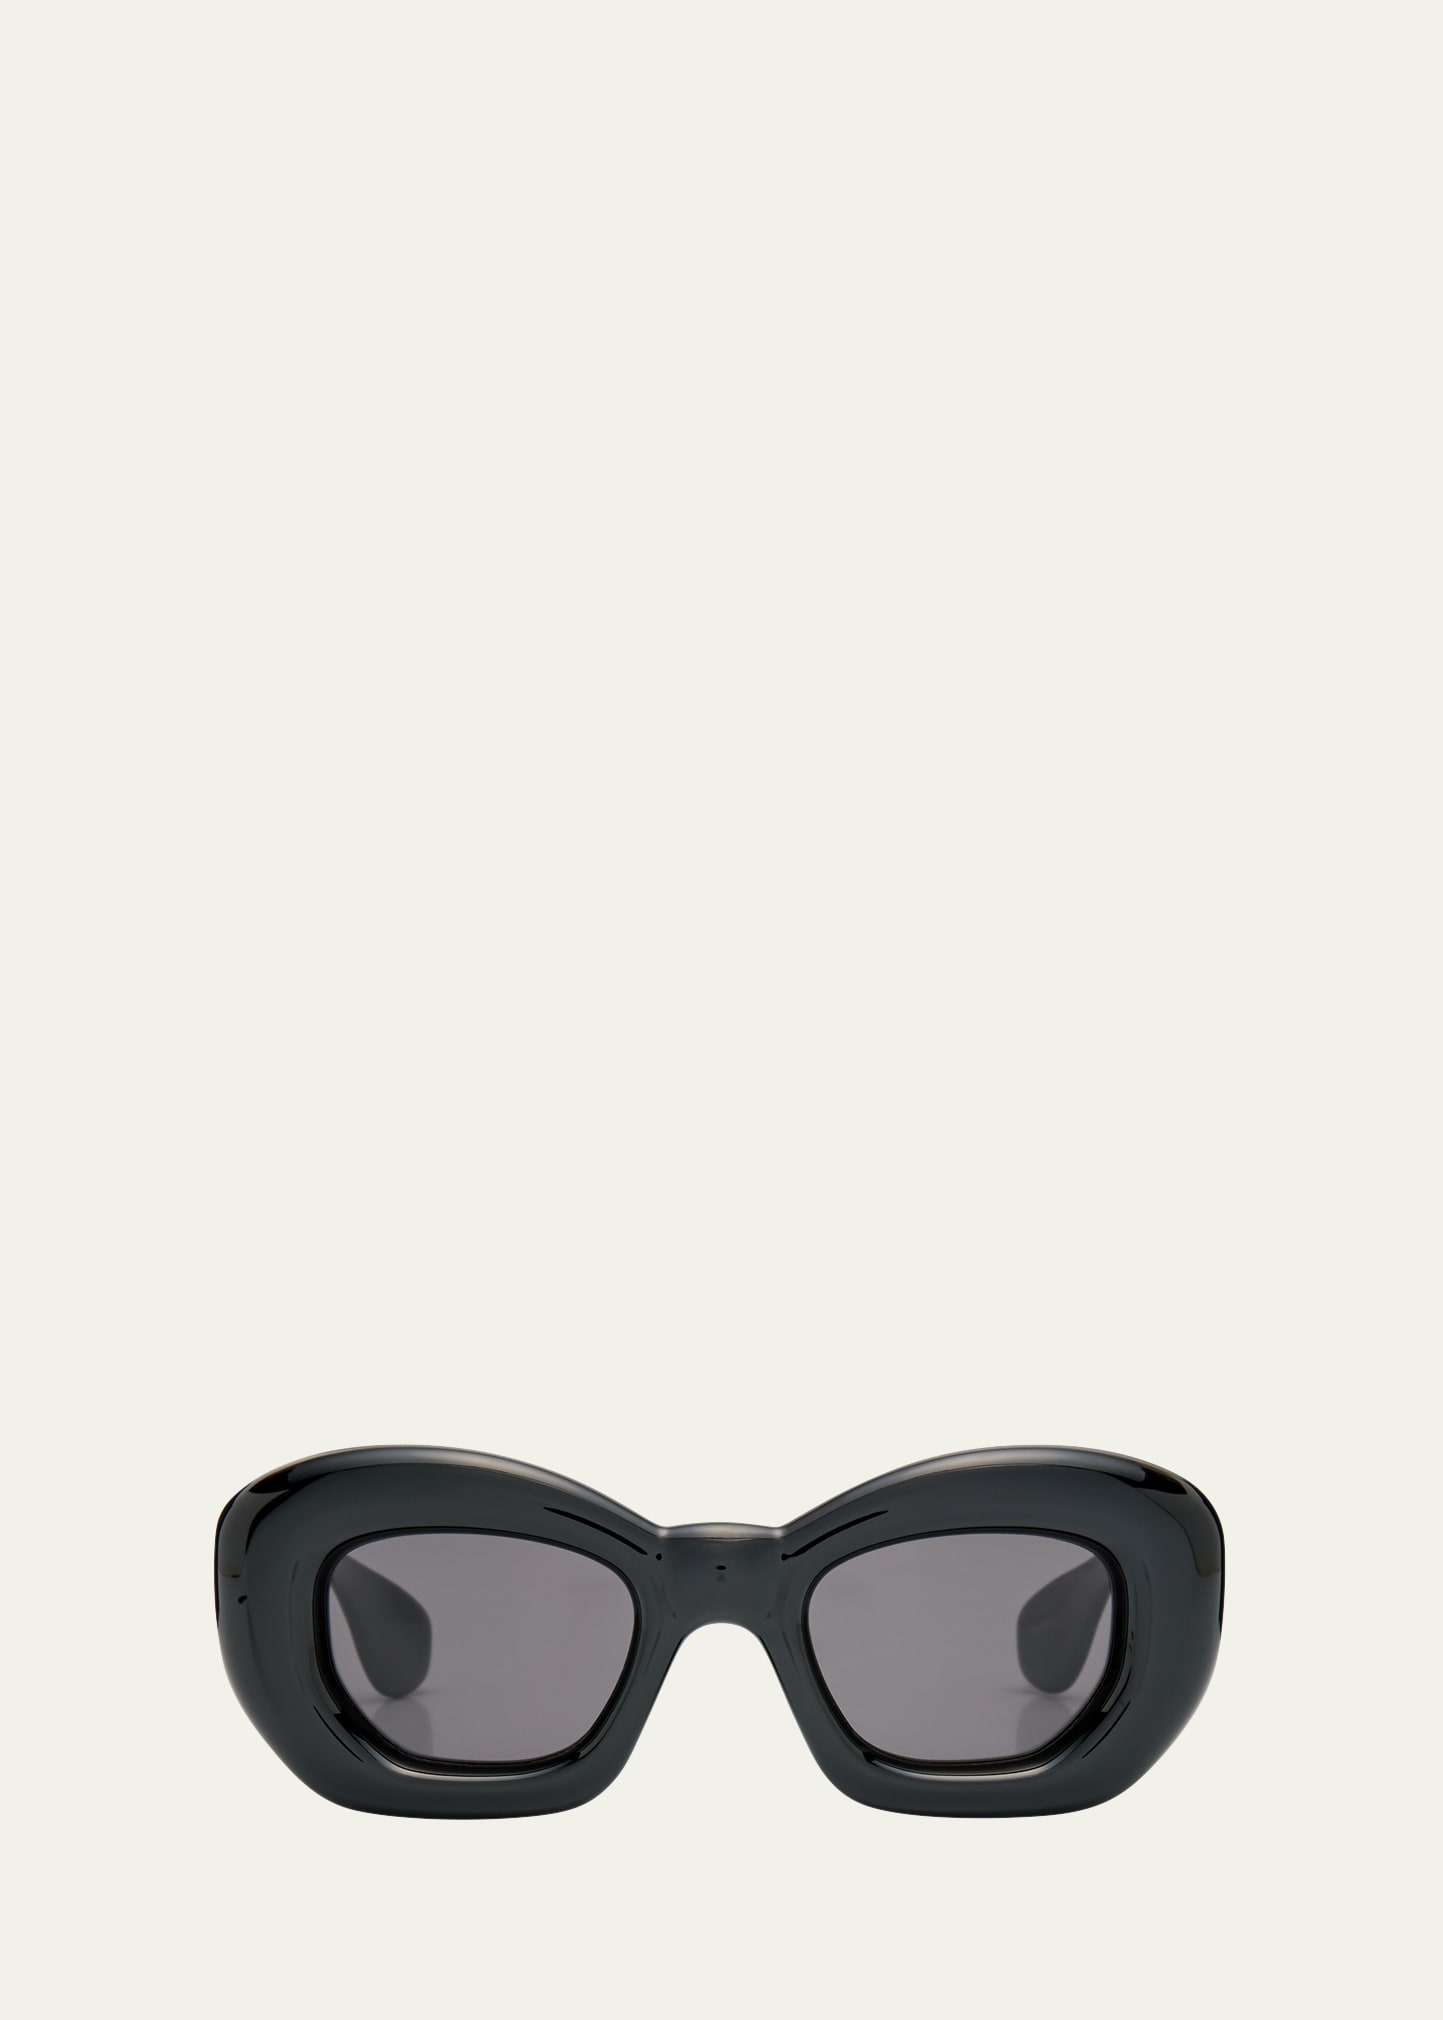 Loewe Inflated Monochrome Acetate Butterfly Sunglasses